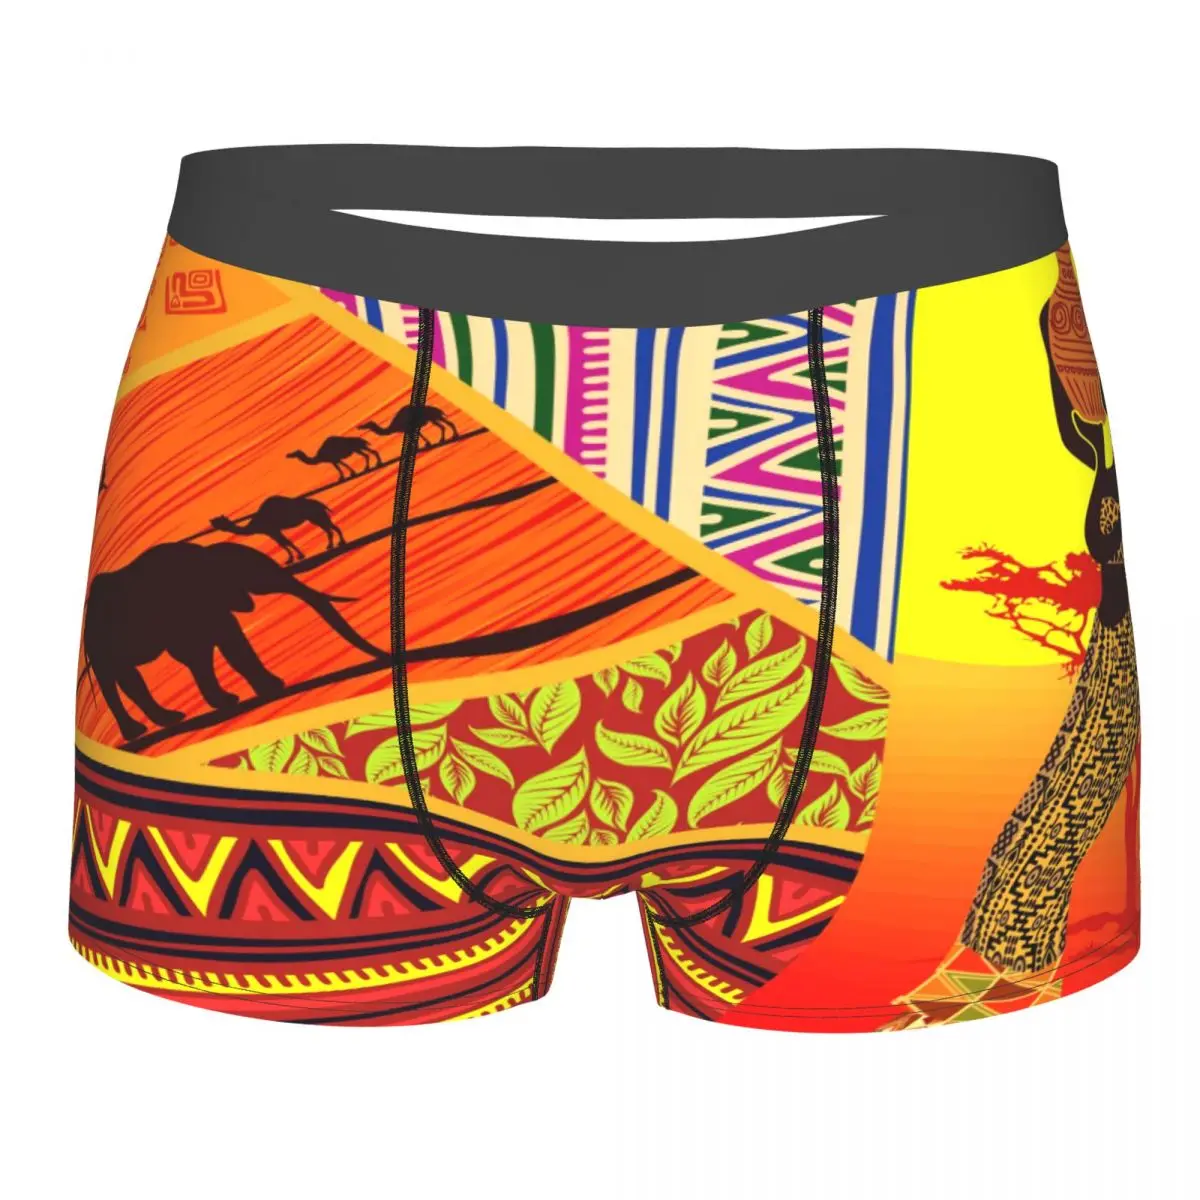 Boxer Men Shorts Underwear Male African Women With Tree And Animals Ornament Boxershorts Panties Underpants Man Sexy